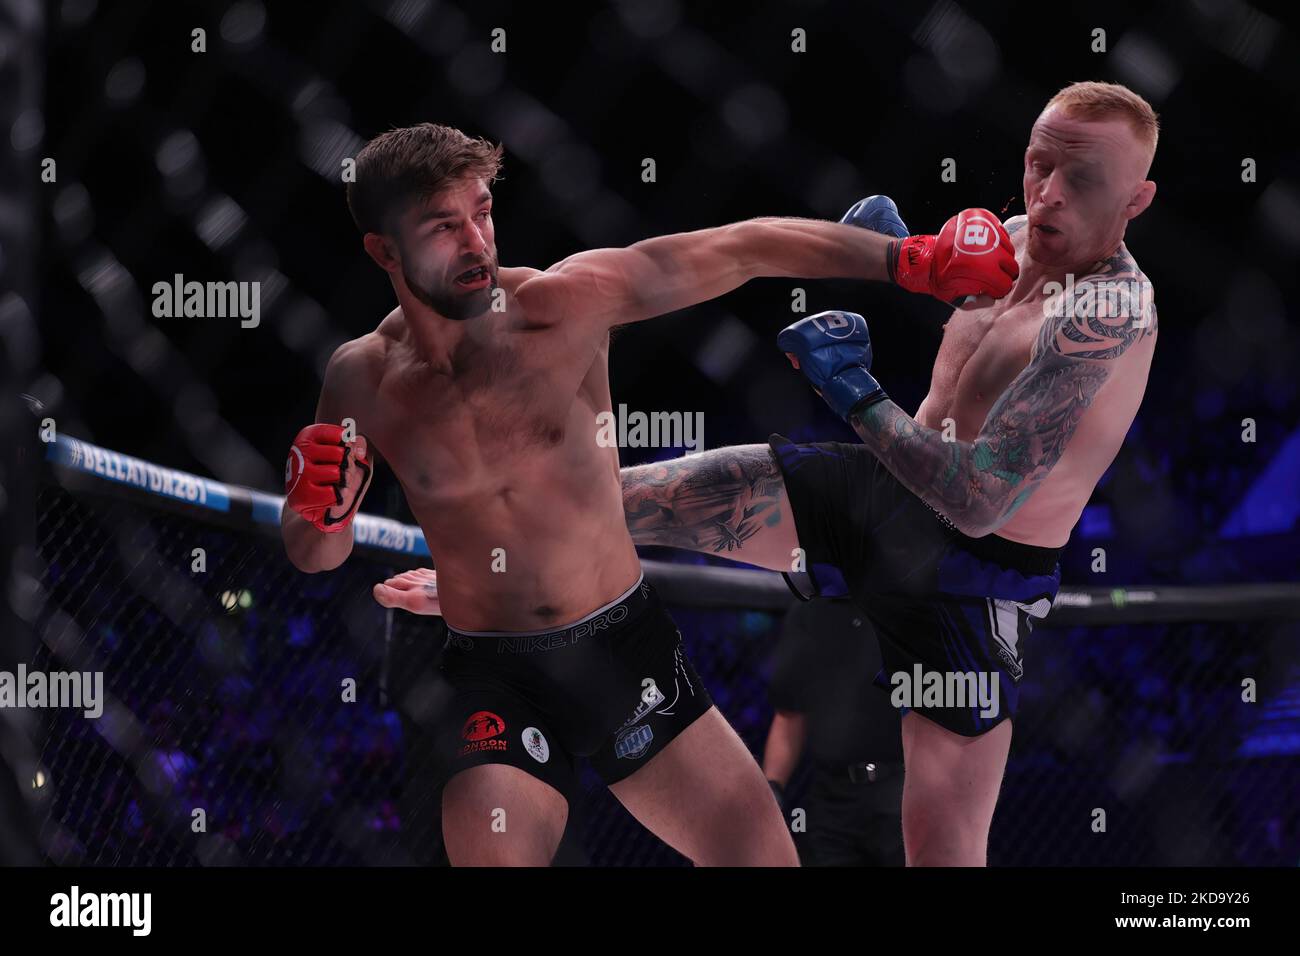 Alfie Davis punches Tim Wilde during the Bellator 281: MVP vs. Storley event at the SSE Arena, Wembley, London on Friday 13th May 2022. (Photo by Pat Scaasi/MI News/NurPhoto) Stock Photo